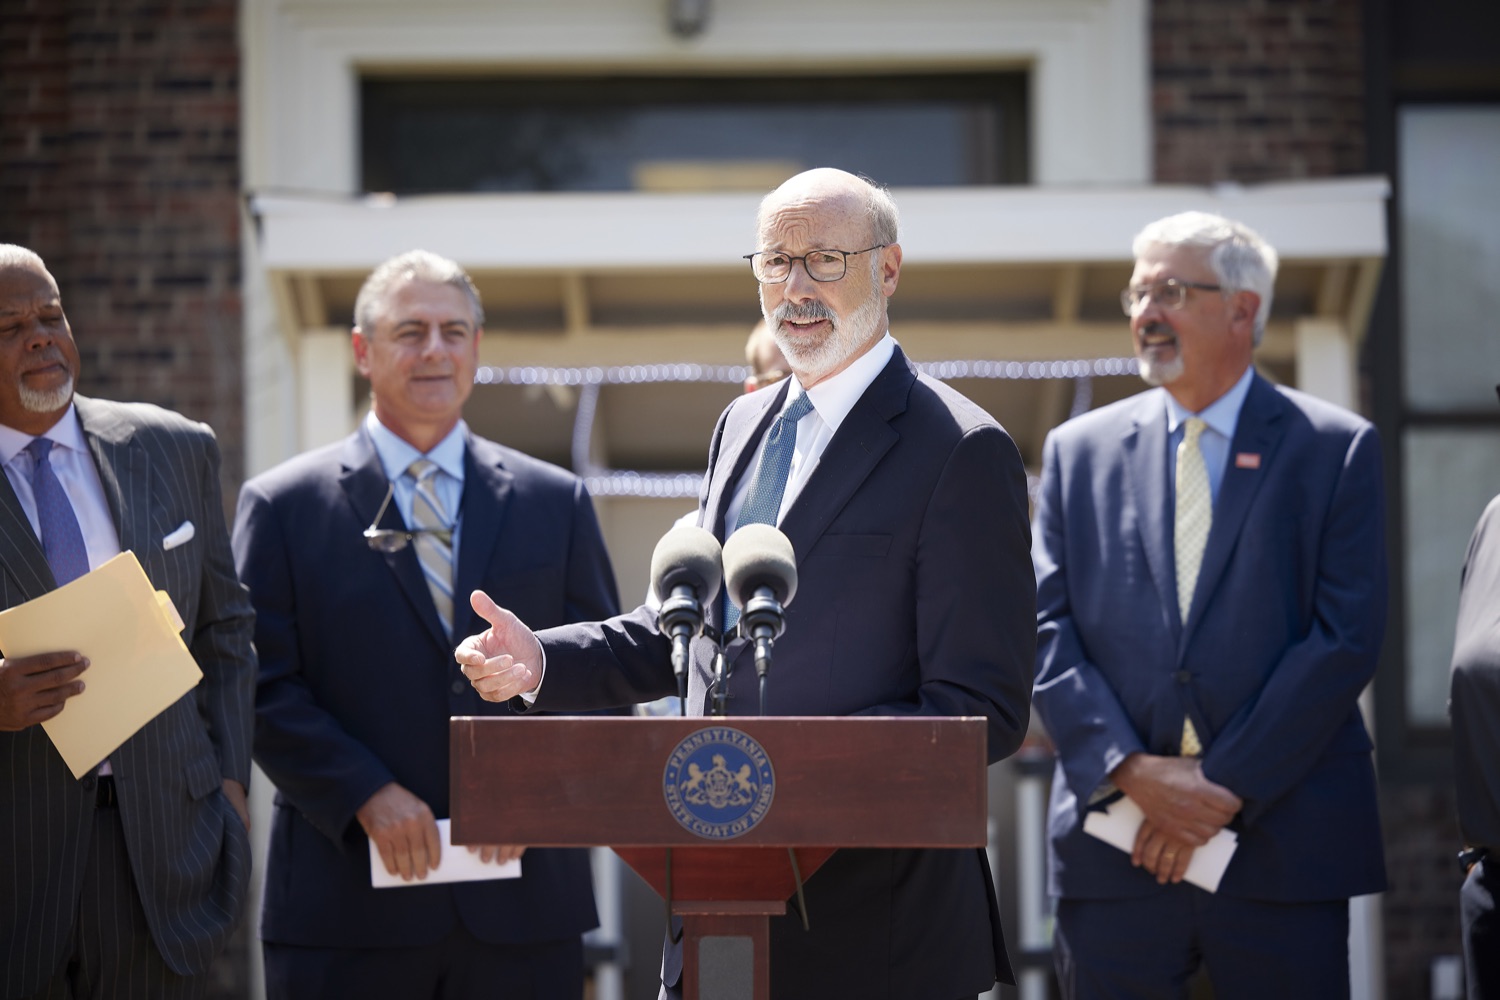 Pennsylvania Governor Tom Wolf speaks with the press.   Governor Tom Wolf was joined by state Representative David Delloso and stakeholders and community members to discuss the reintroduction of the PA Opportunity Program, which would send $2,000 checks directly to Pennsylvanians. I first proposed the PA Opportunity Program back in February, but Republican leaders in the General Assembly just wouldnt get on board with funding it in this years budget, said Gov. Wolf. However, as Ive traveled the commonwealth, Ive heard directly from so many people about how much this program would mean to them and their families. Im not going to stop fighting until the people of Pennsylvania get the help they need and deserve. Folcroft, PA  August 2, 2022<br><a href="https://filesource.amperwave.net/commonwealthofpa/photo/22070_gov_opportunityFund_dz_001.JPG" target="_blank">⇣ Download Photo</a>